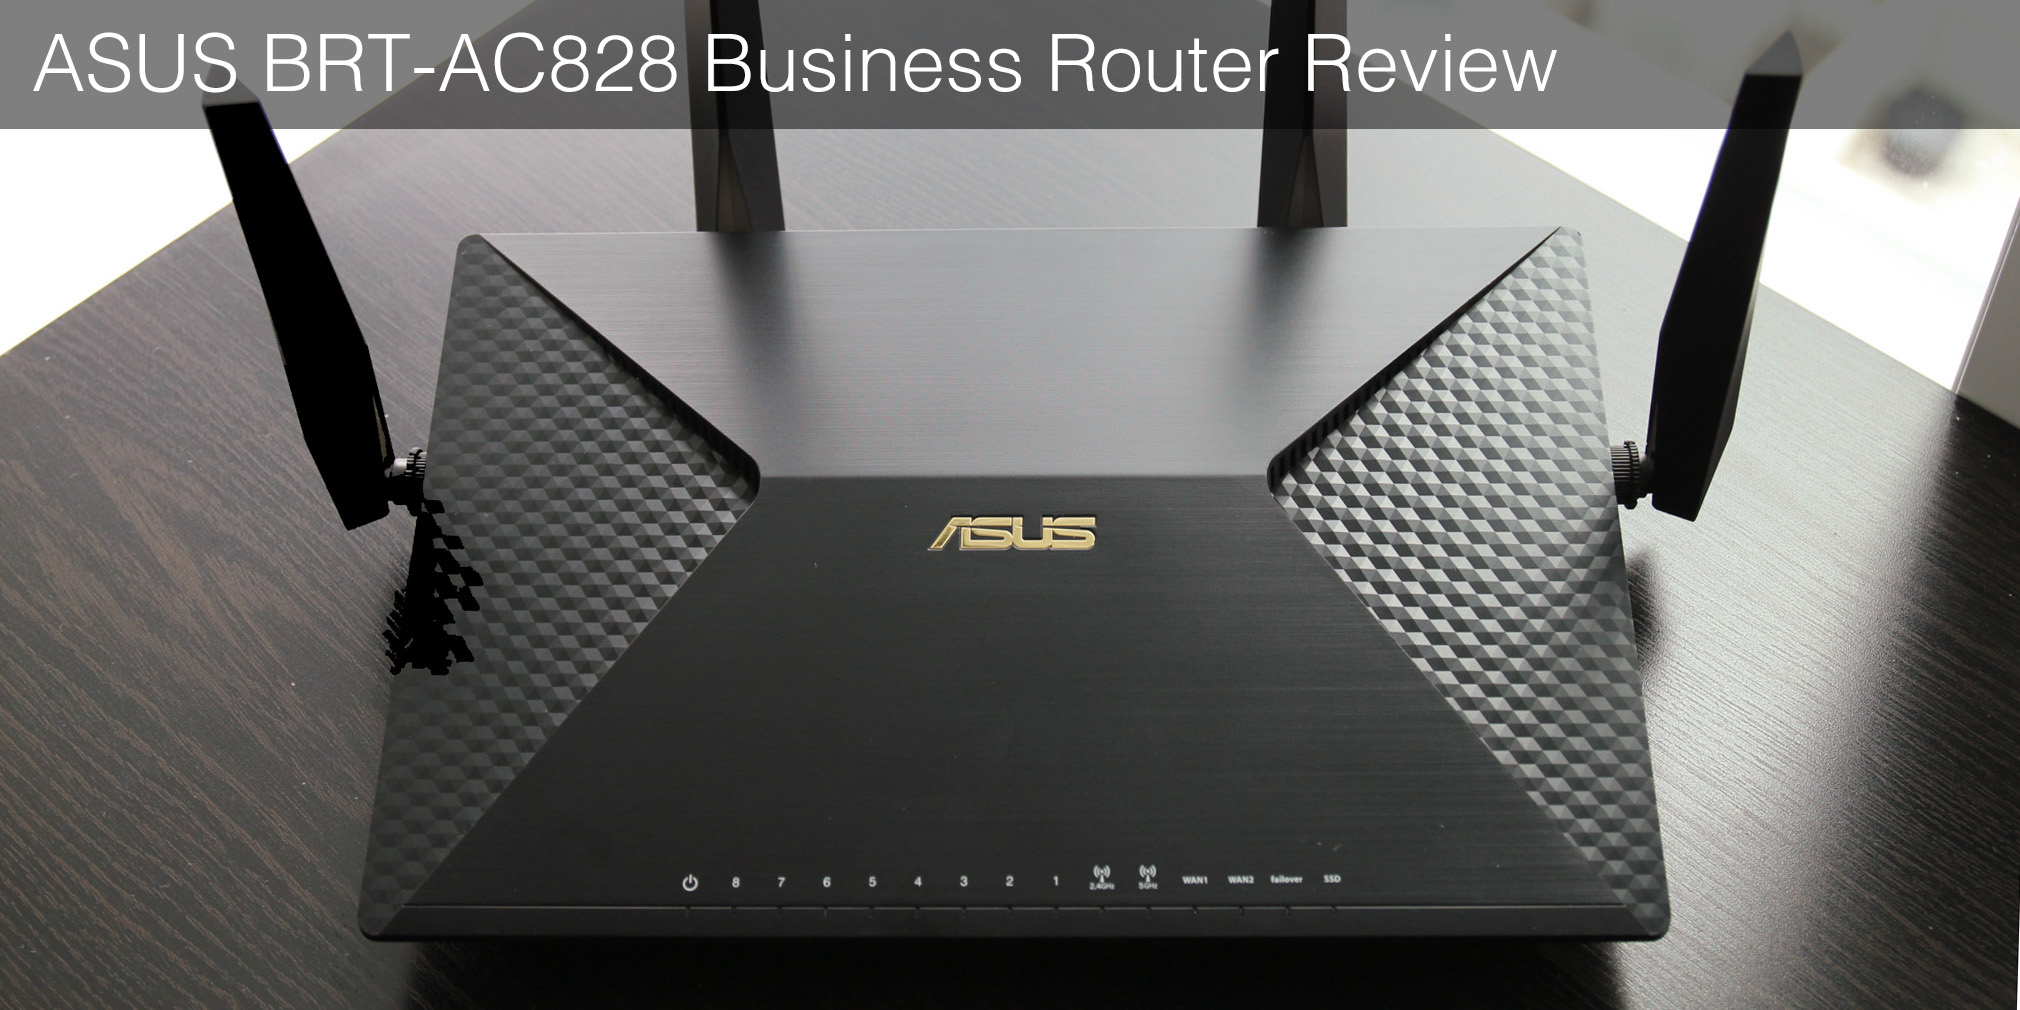 Asus BRT-AC828 Business Router Review